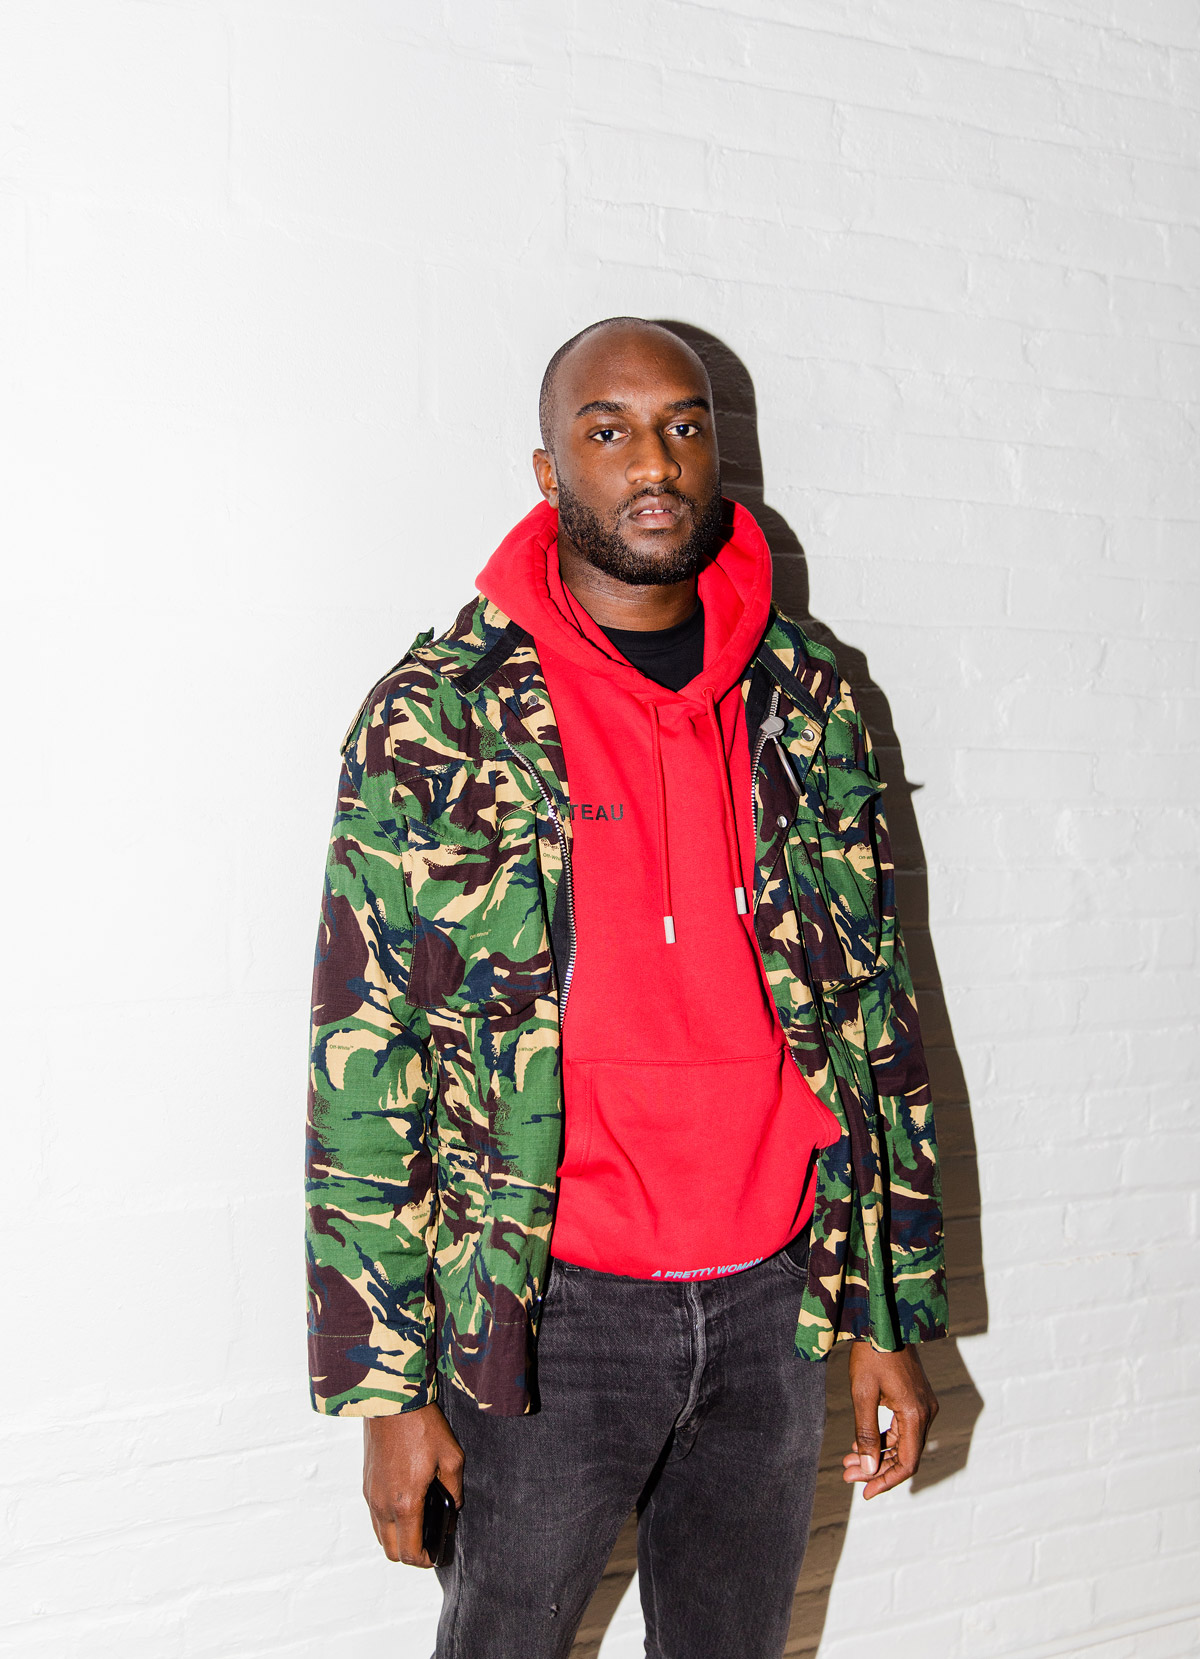 #TheCreatorClass: “On Fashion And Images” feat. Off White’s Virgil ...